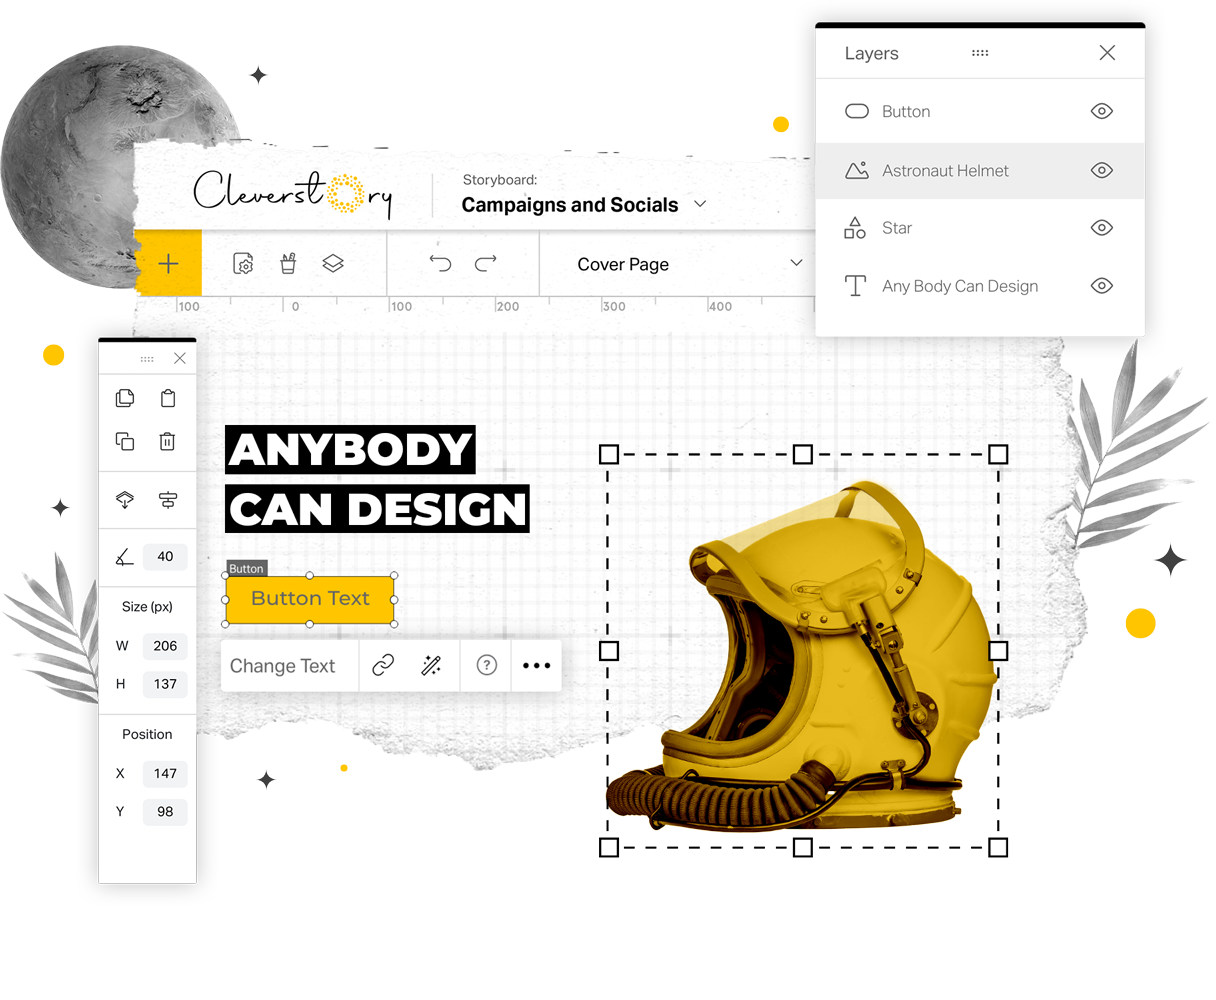 Cleverstory product image